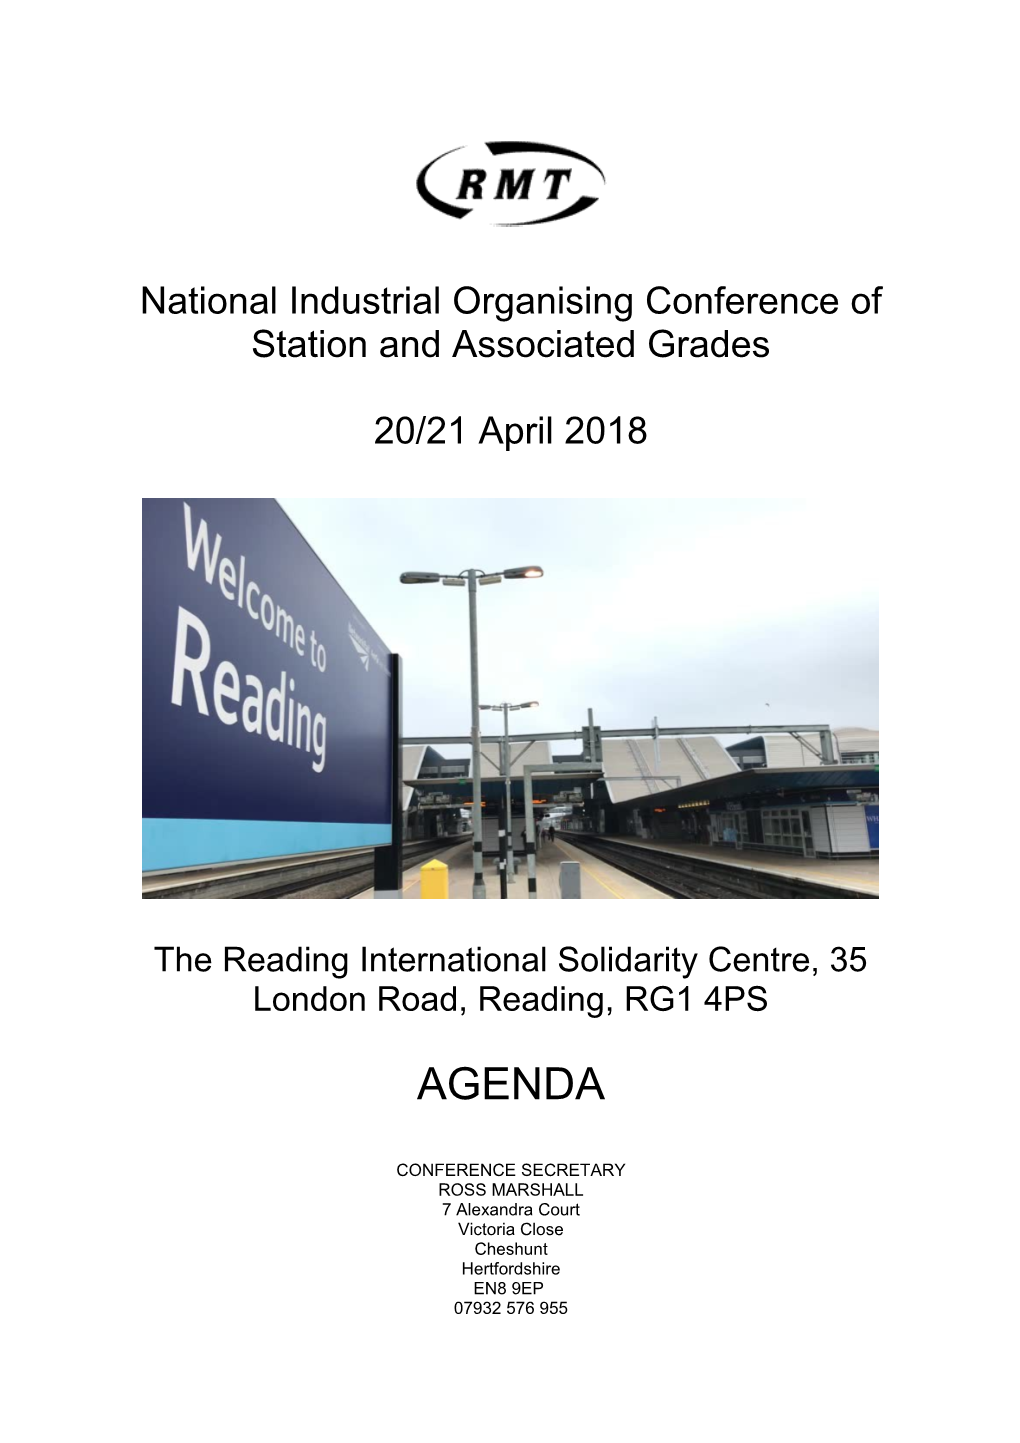 National Industrial Organising Conference of Station and Associated Grades